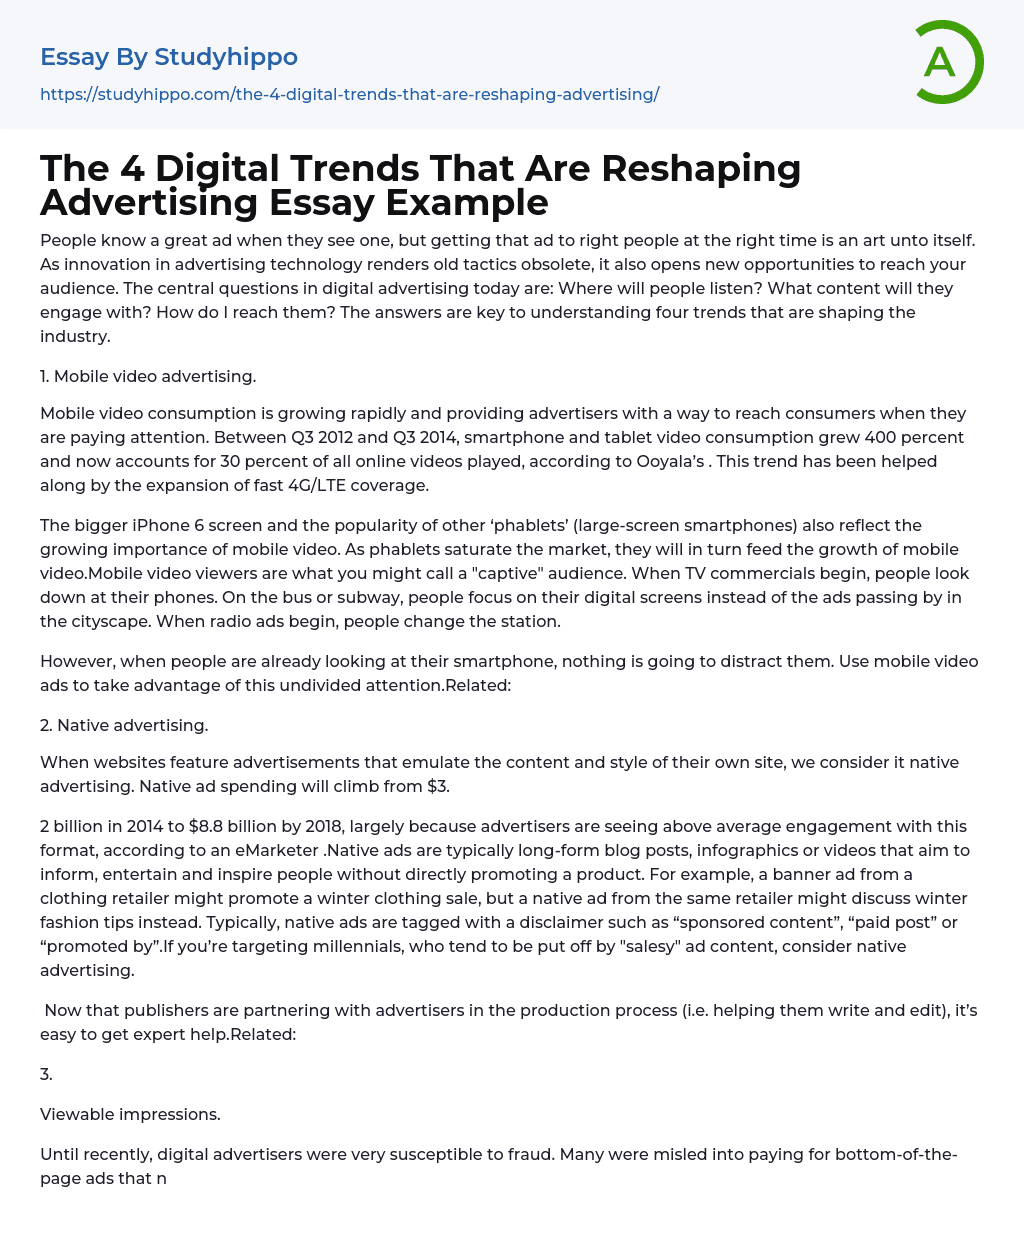 The 4 Digital Trends That Are Reshaping Advertising Essay Example